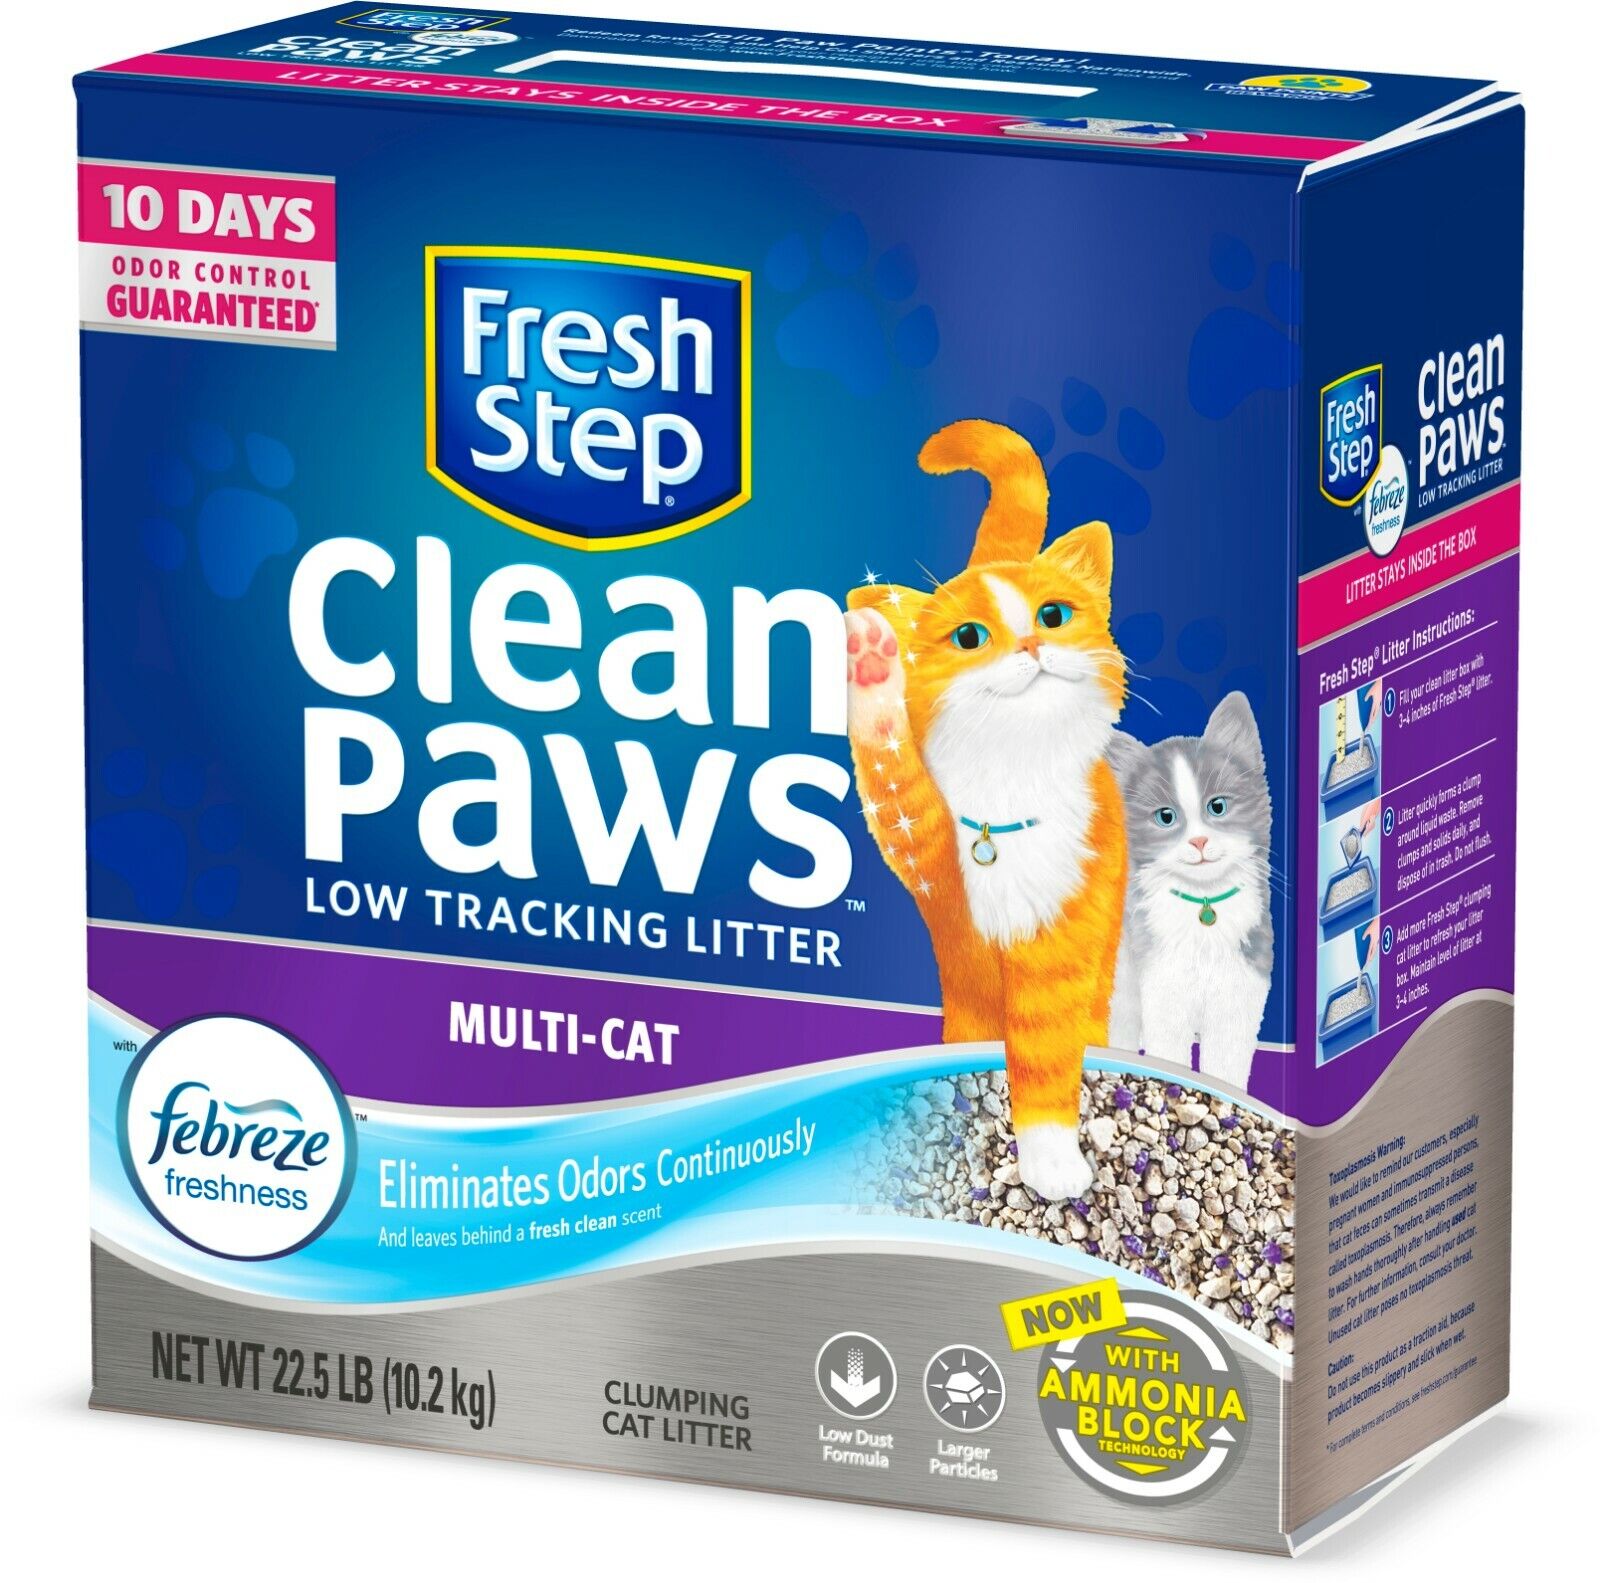 Fresh Step Multi-Cat Scented Clumping Cat Litter with Power of Febreze , 22.5 lb